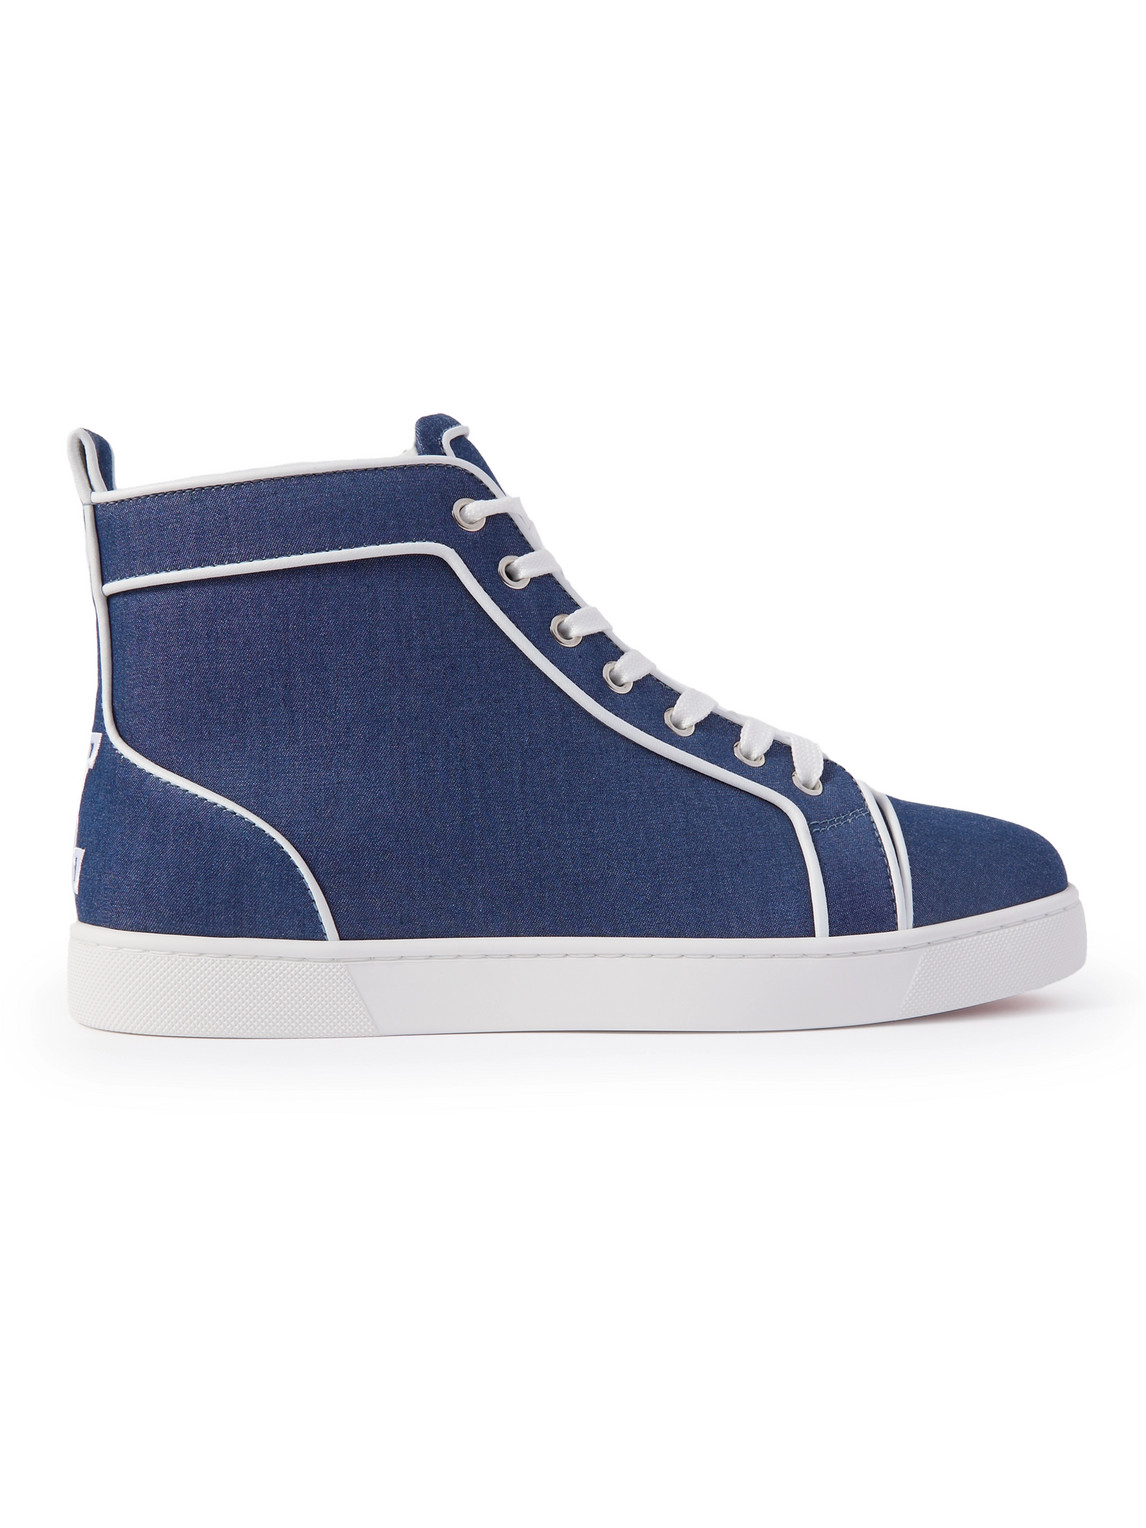 CHRISTIAN LOUBOUTIN LOGO-EMBROIDERED LEATHER-TRIMMED DENIM HIGH-TOP SNEAKERS